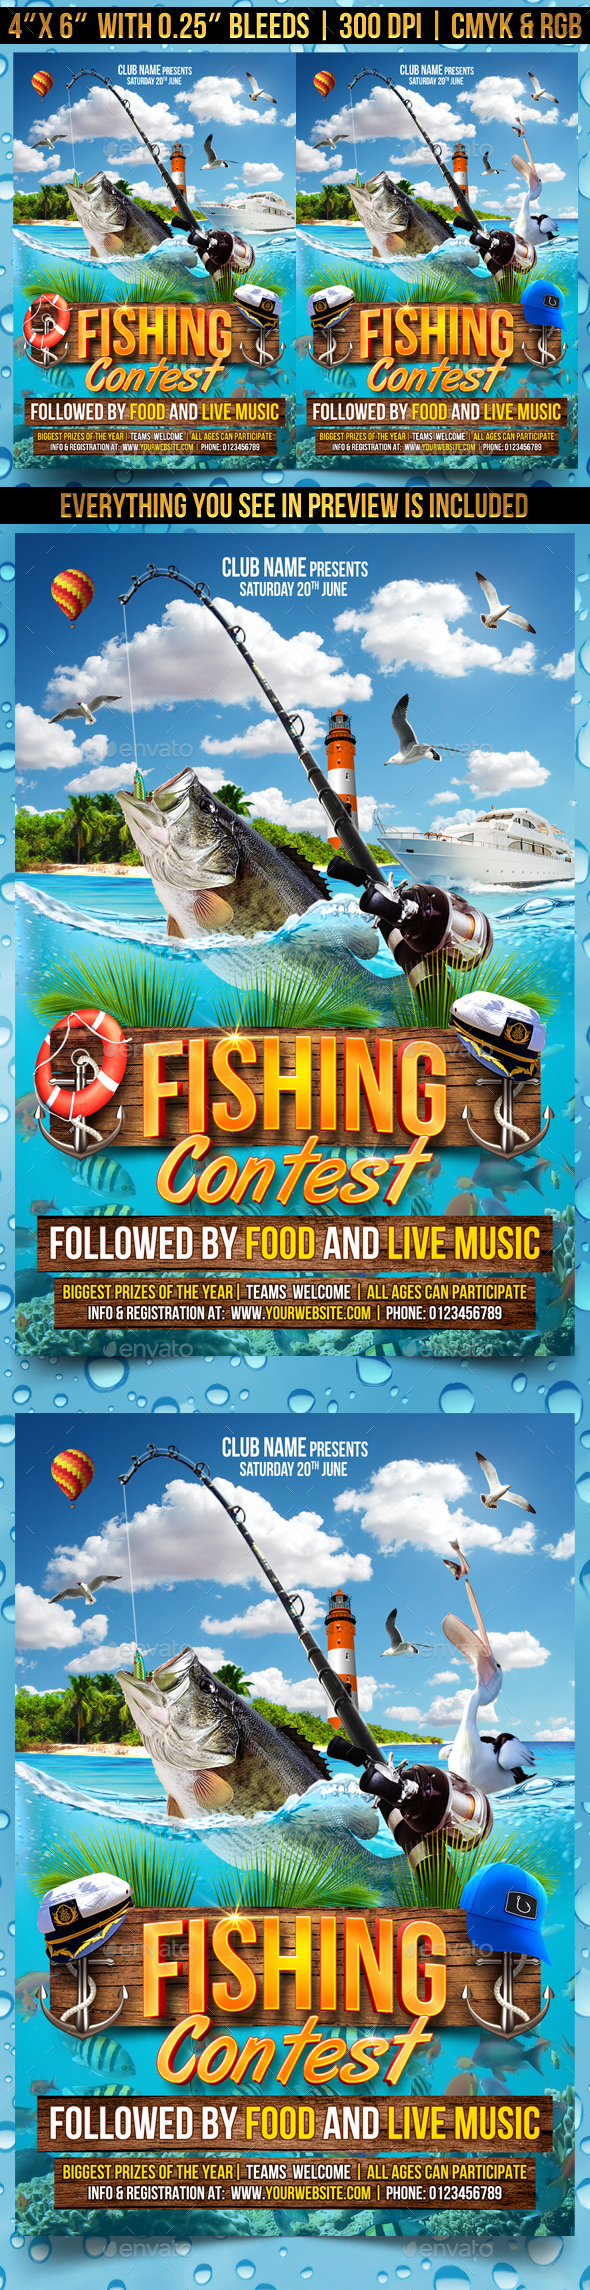 Fishing Contest Flyer Template With Regard To Fishing Flyer Template Within Fishing Flyer Template